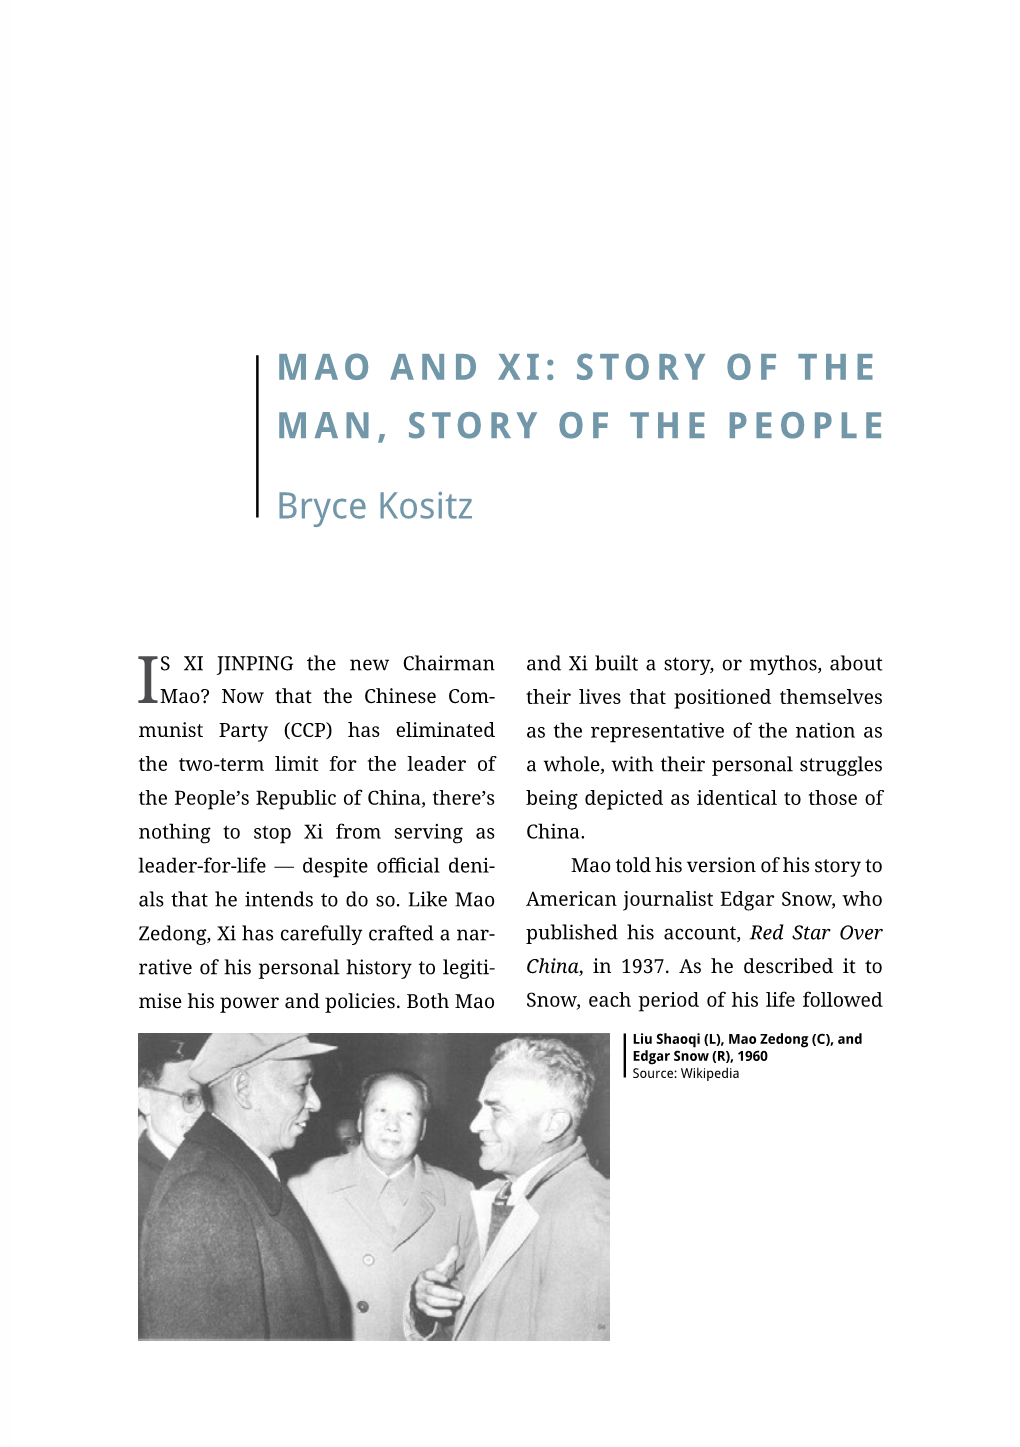 Mao and Xi: Story of the Man, Story of the People